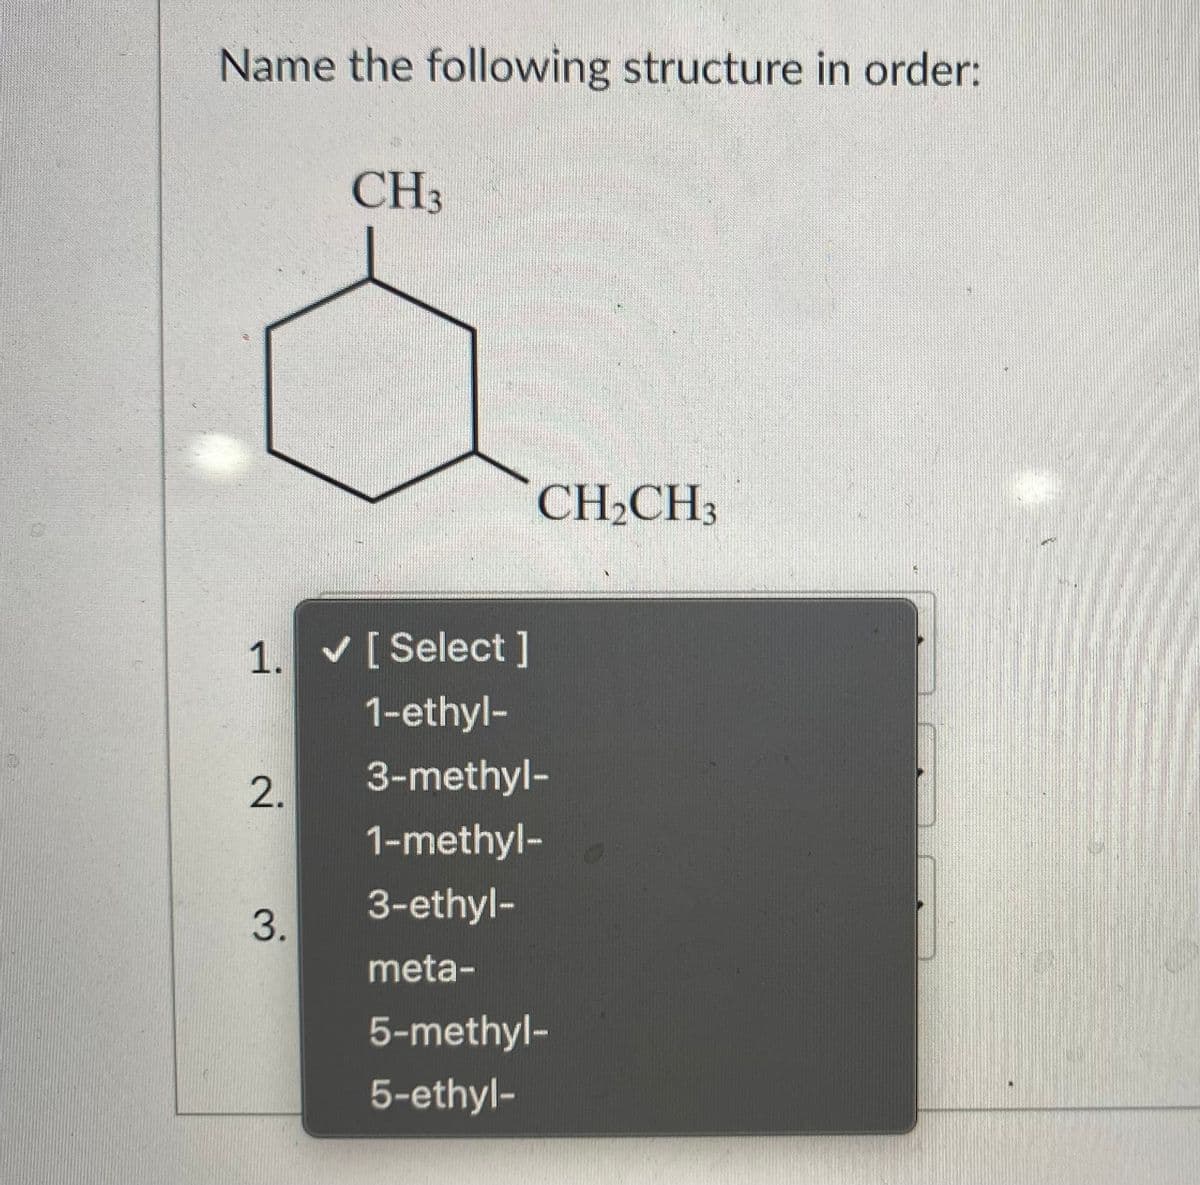 Name the following structure in order:
CH3
CH,CH3
1. V[ Select ]
1-ethyl-
2.
3-methyl-
1-methyl-
3-ethyl-
3.
meta-
5-methyl-
5-ethyl-
